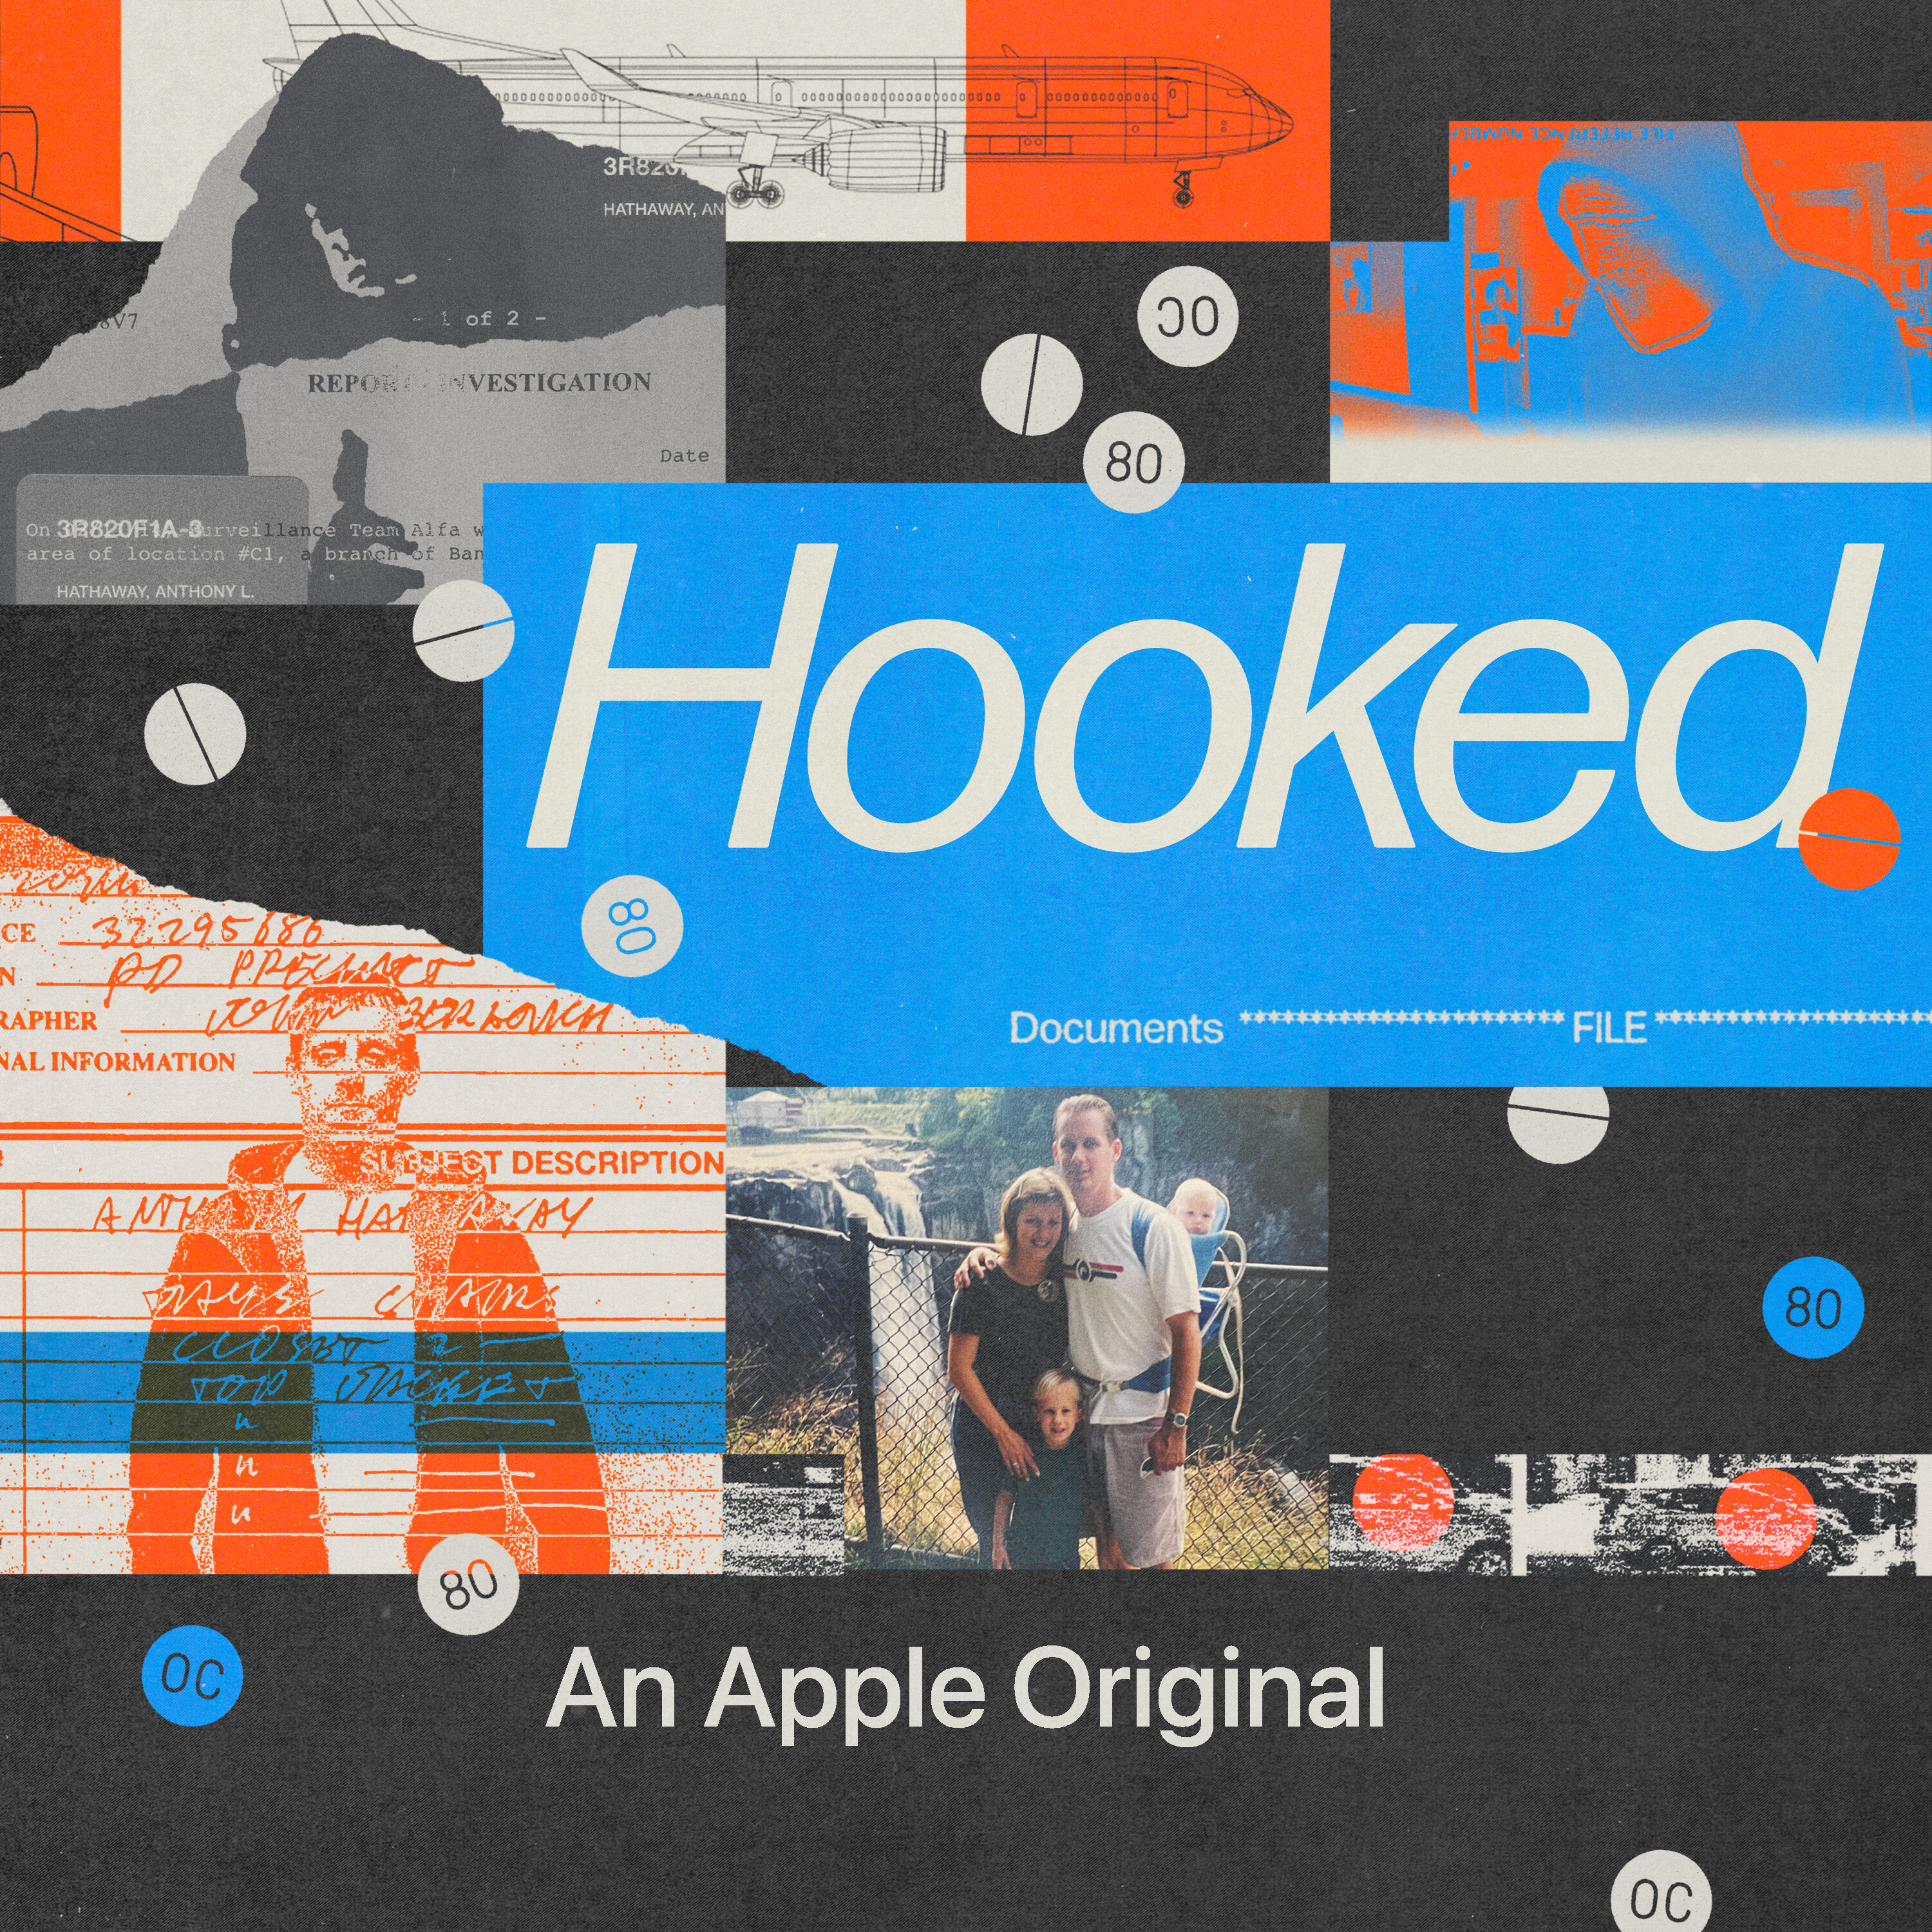 Hooked podcast show image